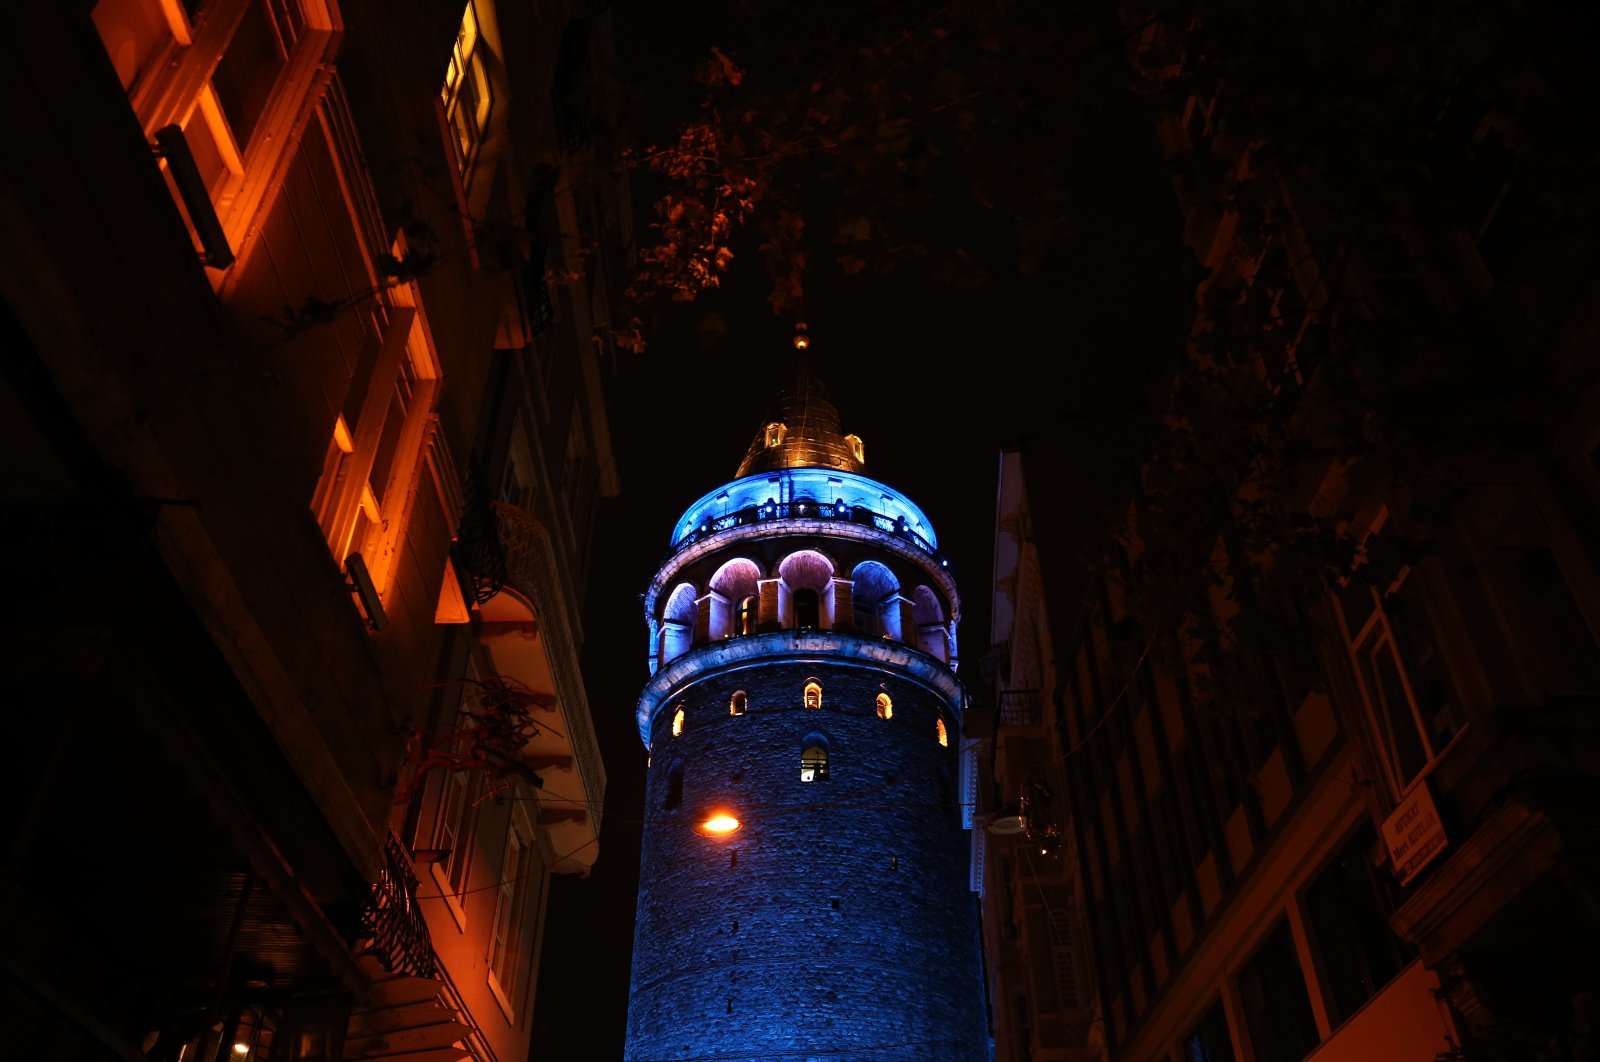 The Galata Tower (pictured) in Istanbul's Beyoğlu district will also light up in blue for the occasion. (AA Photo)